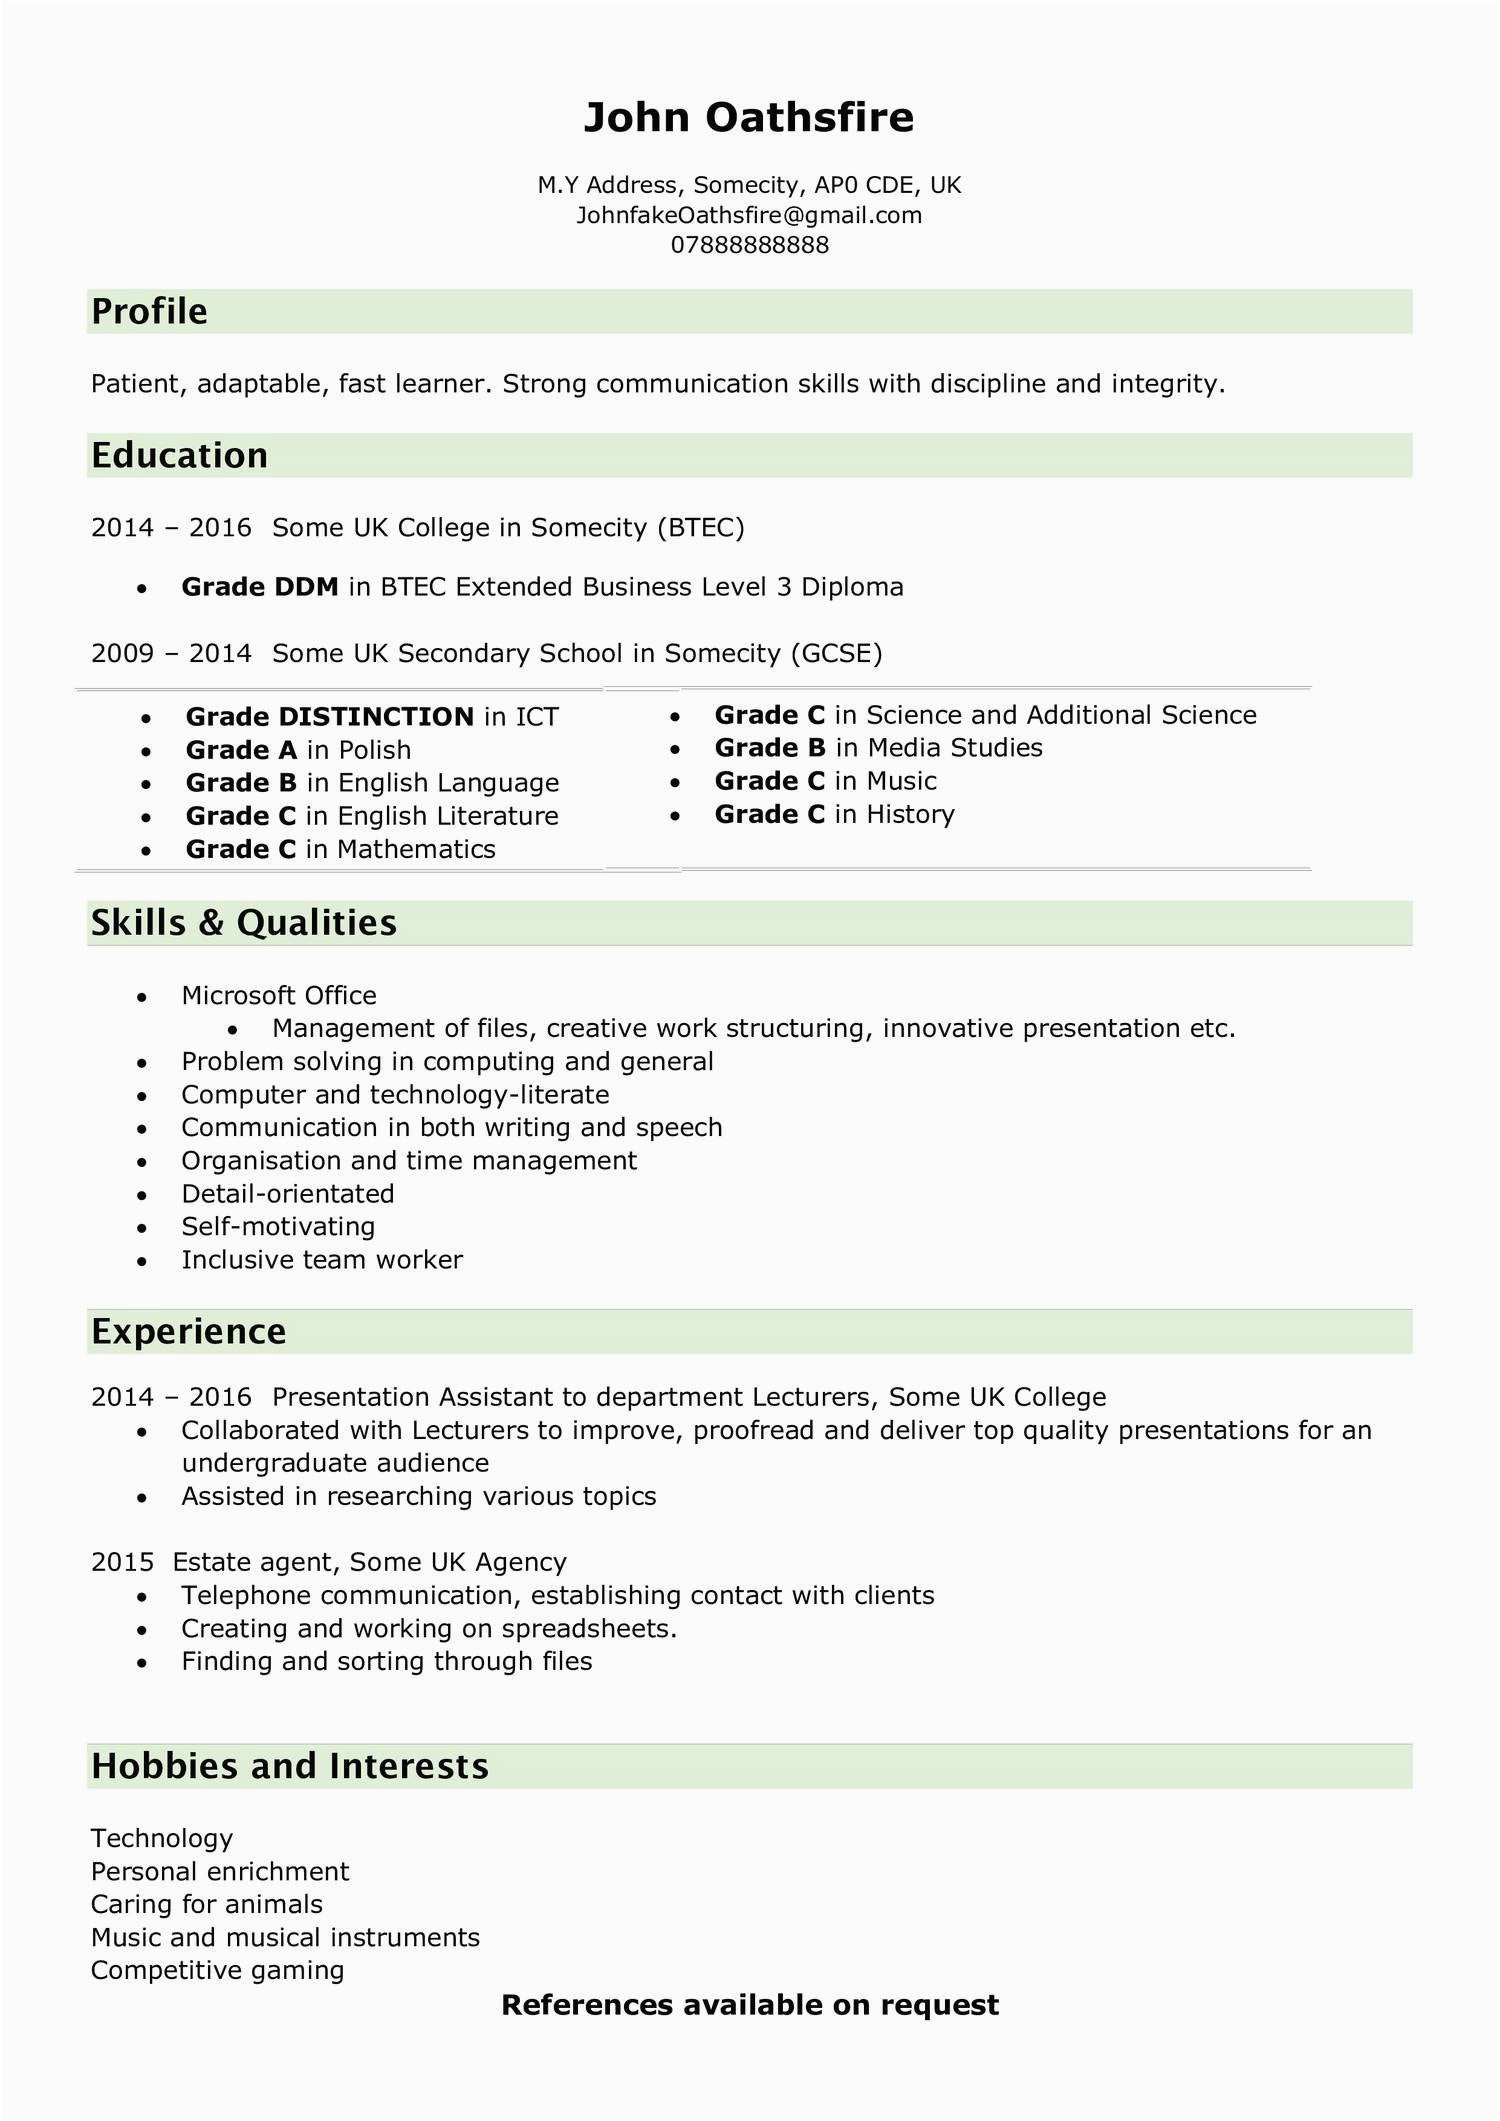 Resume Template for 18 Year Old Resume Of An 18 Year Old Looking for Critique On Updated